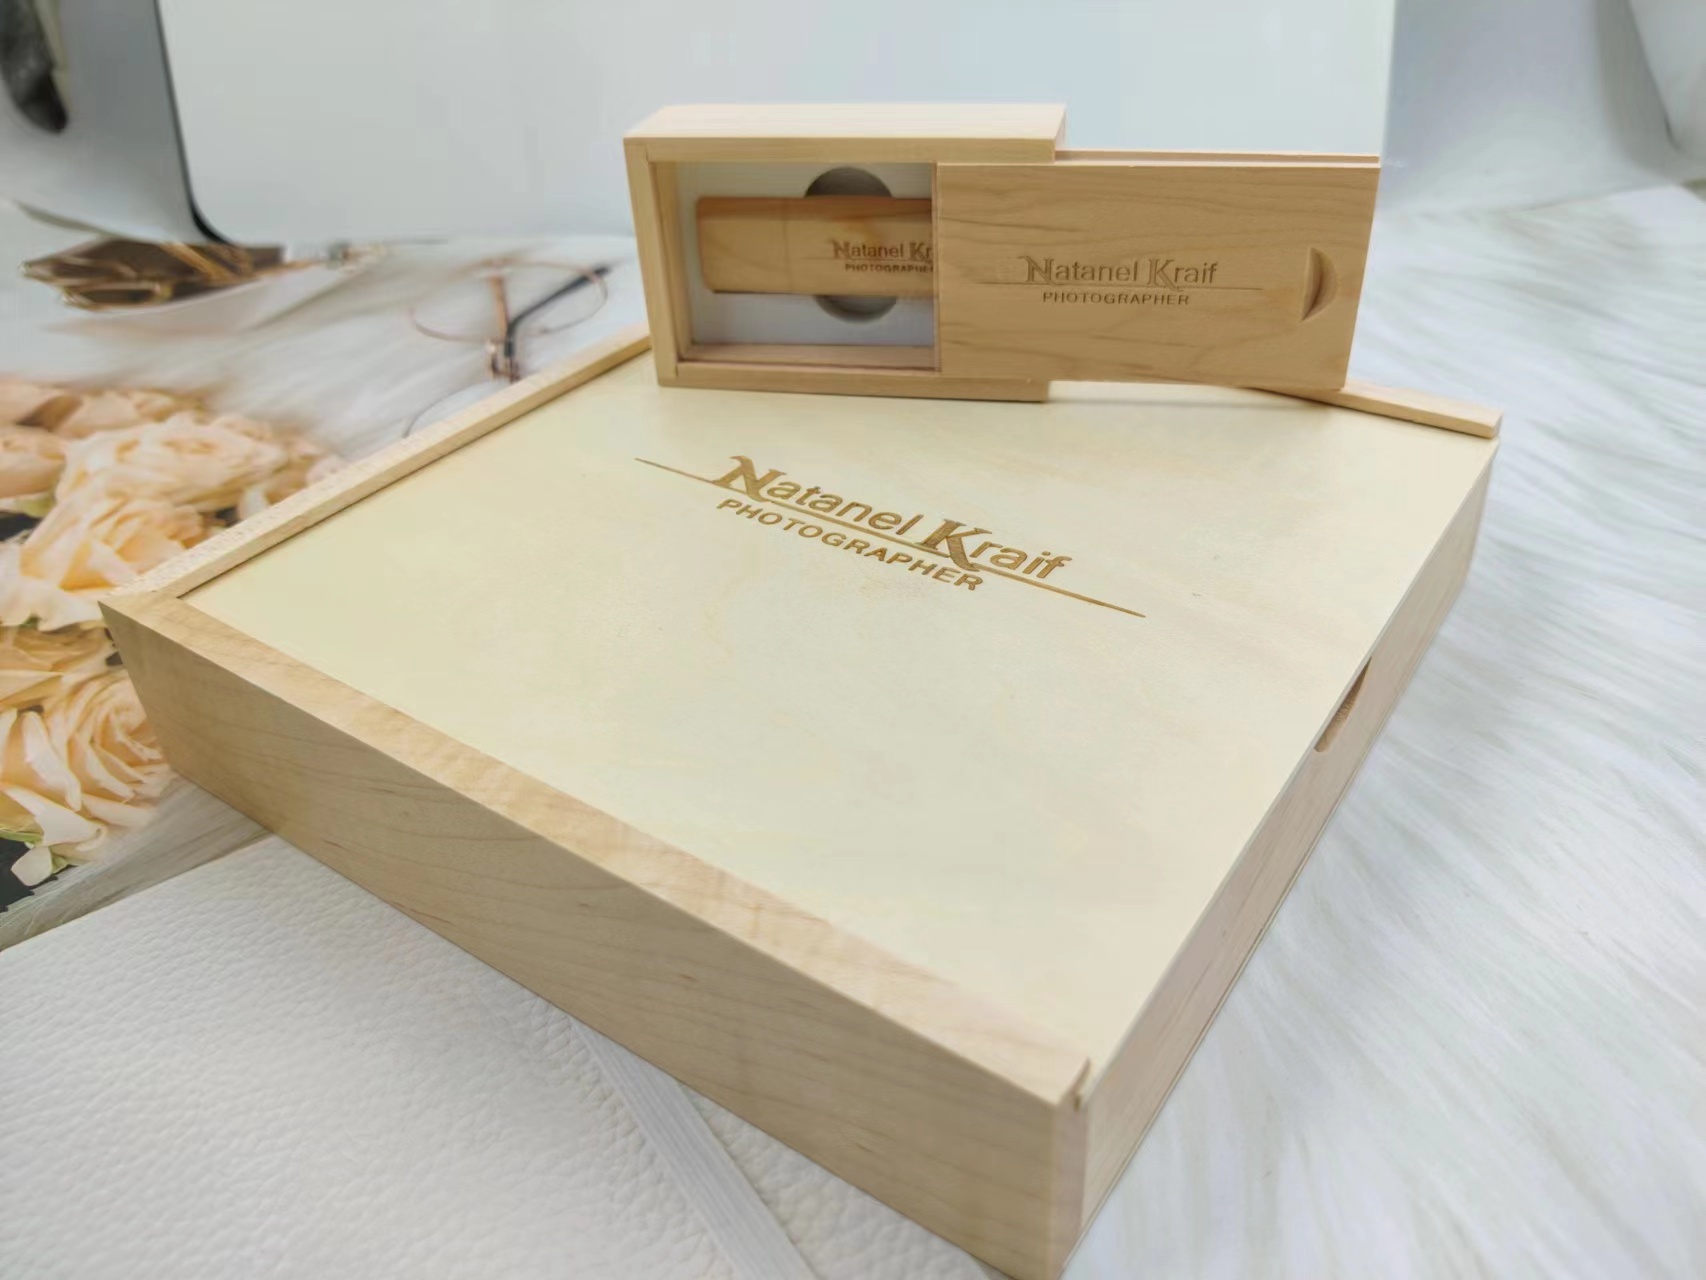 Album wooden BOX and small box , USB3.0 64GB , engraved different names and date